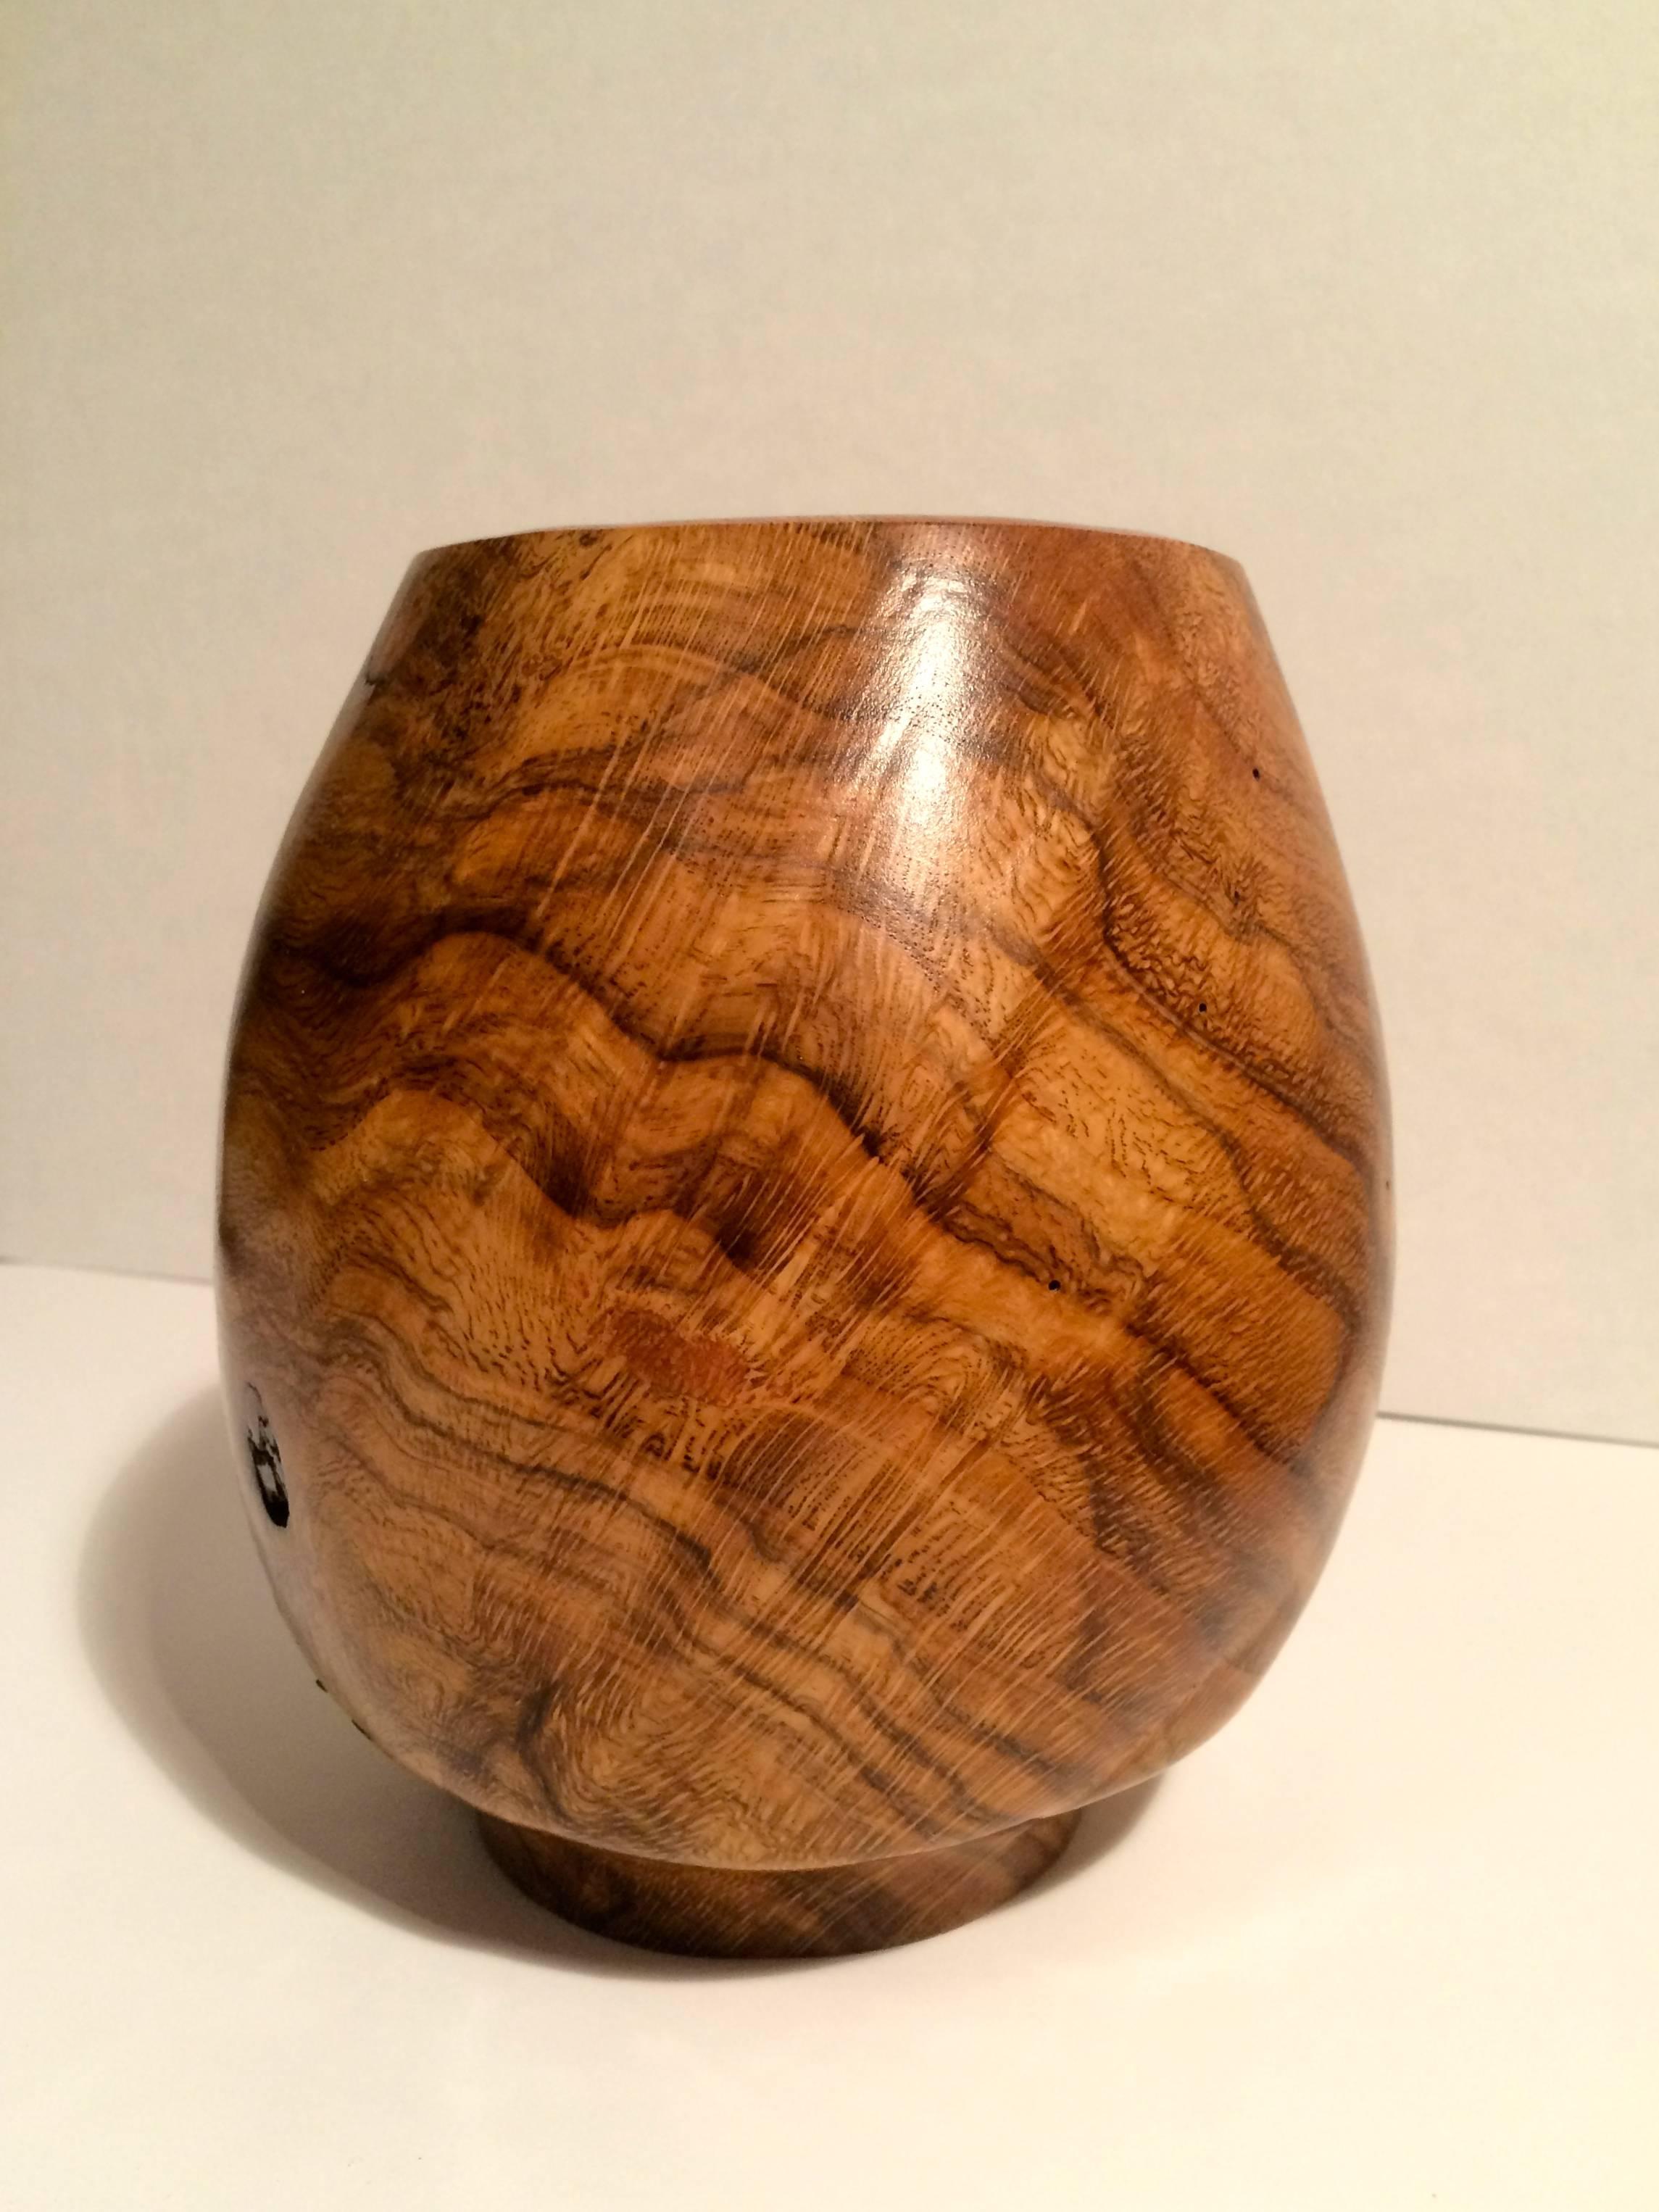 David N Ebner is a leading figure in the finest craftsmanship of Studio Furniture & Design, above is one of five recent works, all with a natural wild edge. The oak burls are truly magnificent, all one of a kind. Please click on to see the other